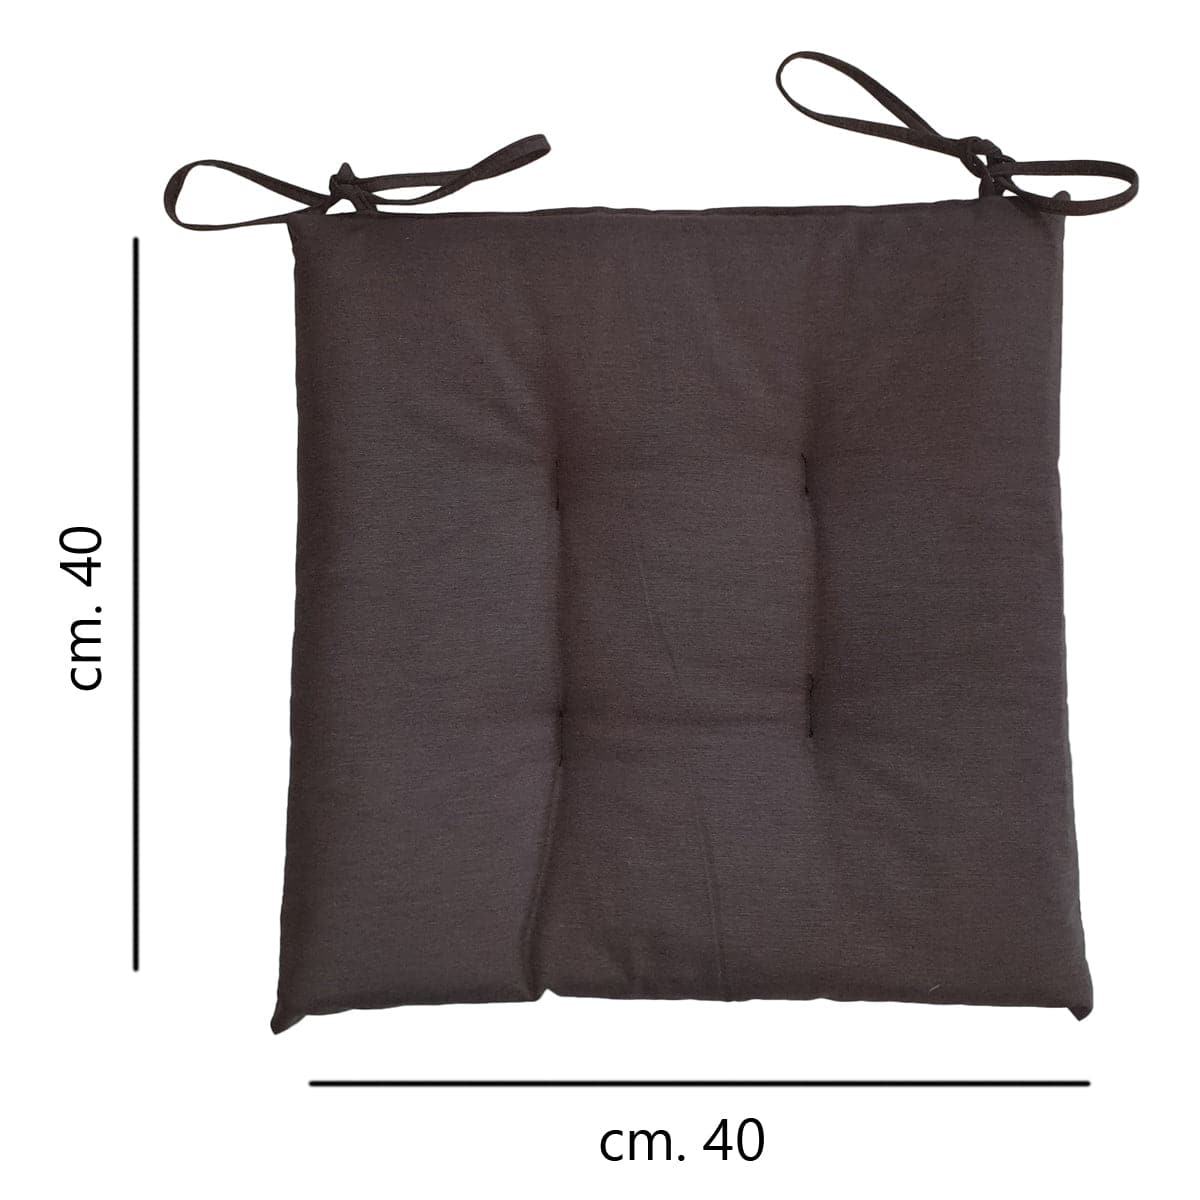 RELAX CHAIR COVER BROWN 40X40 CM - best price from Maltashopper.com BR480221651